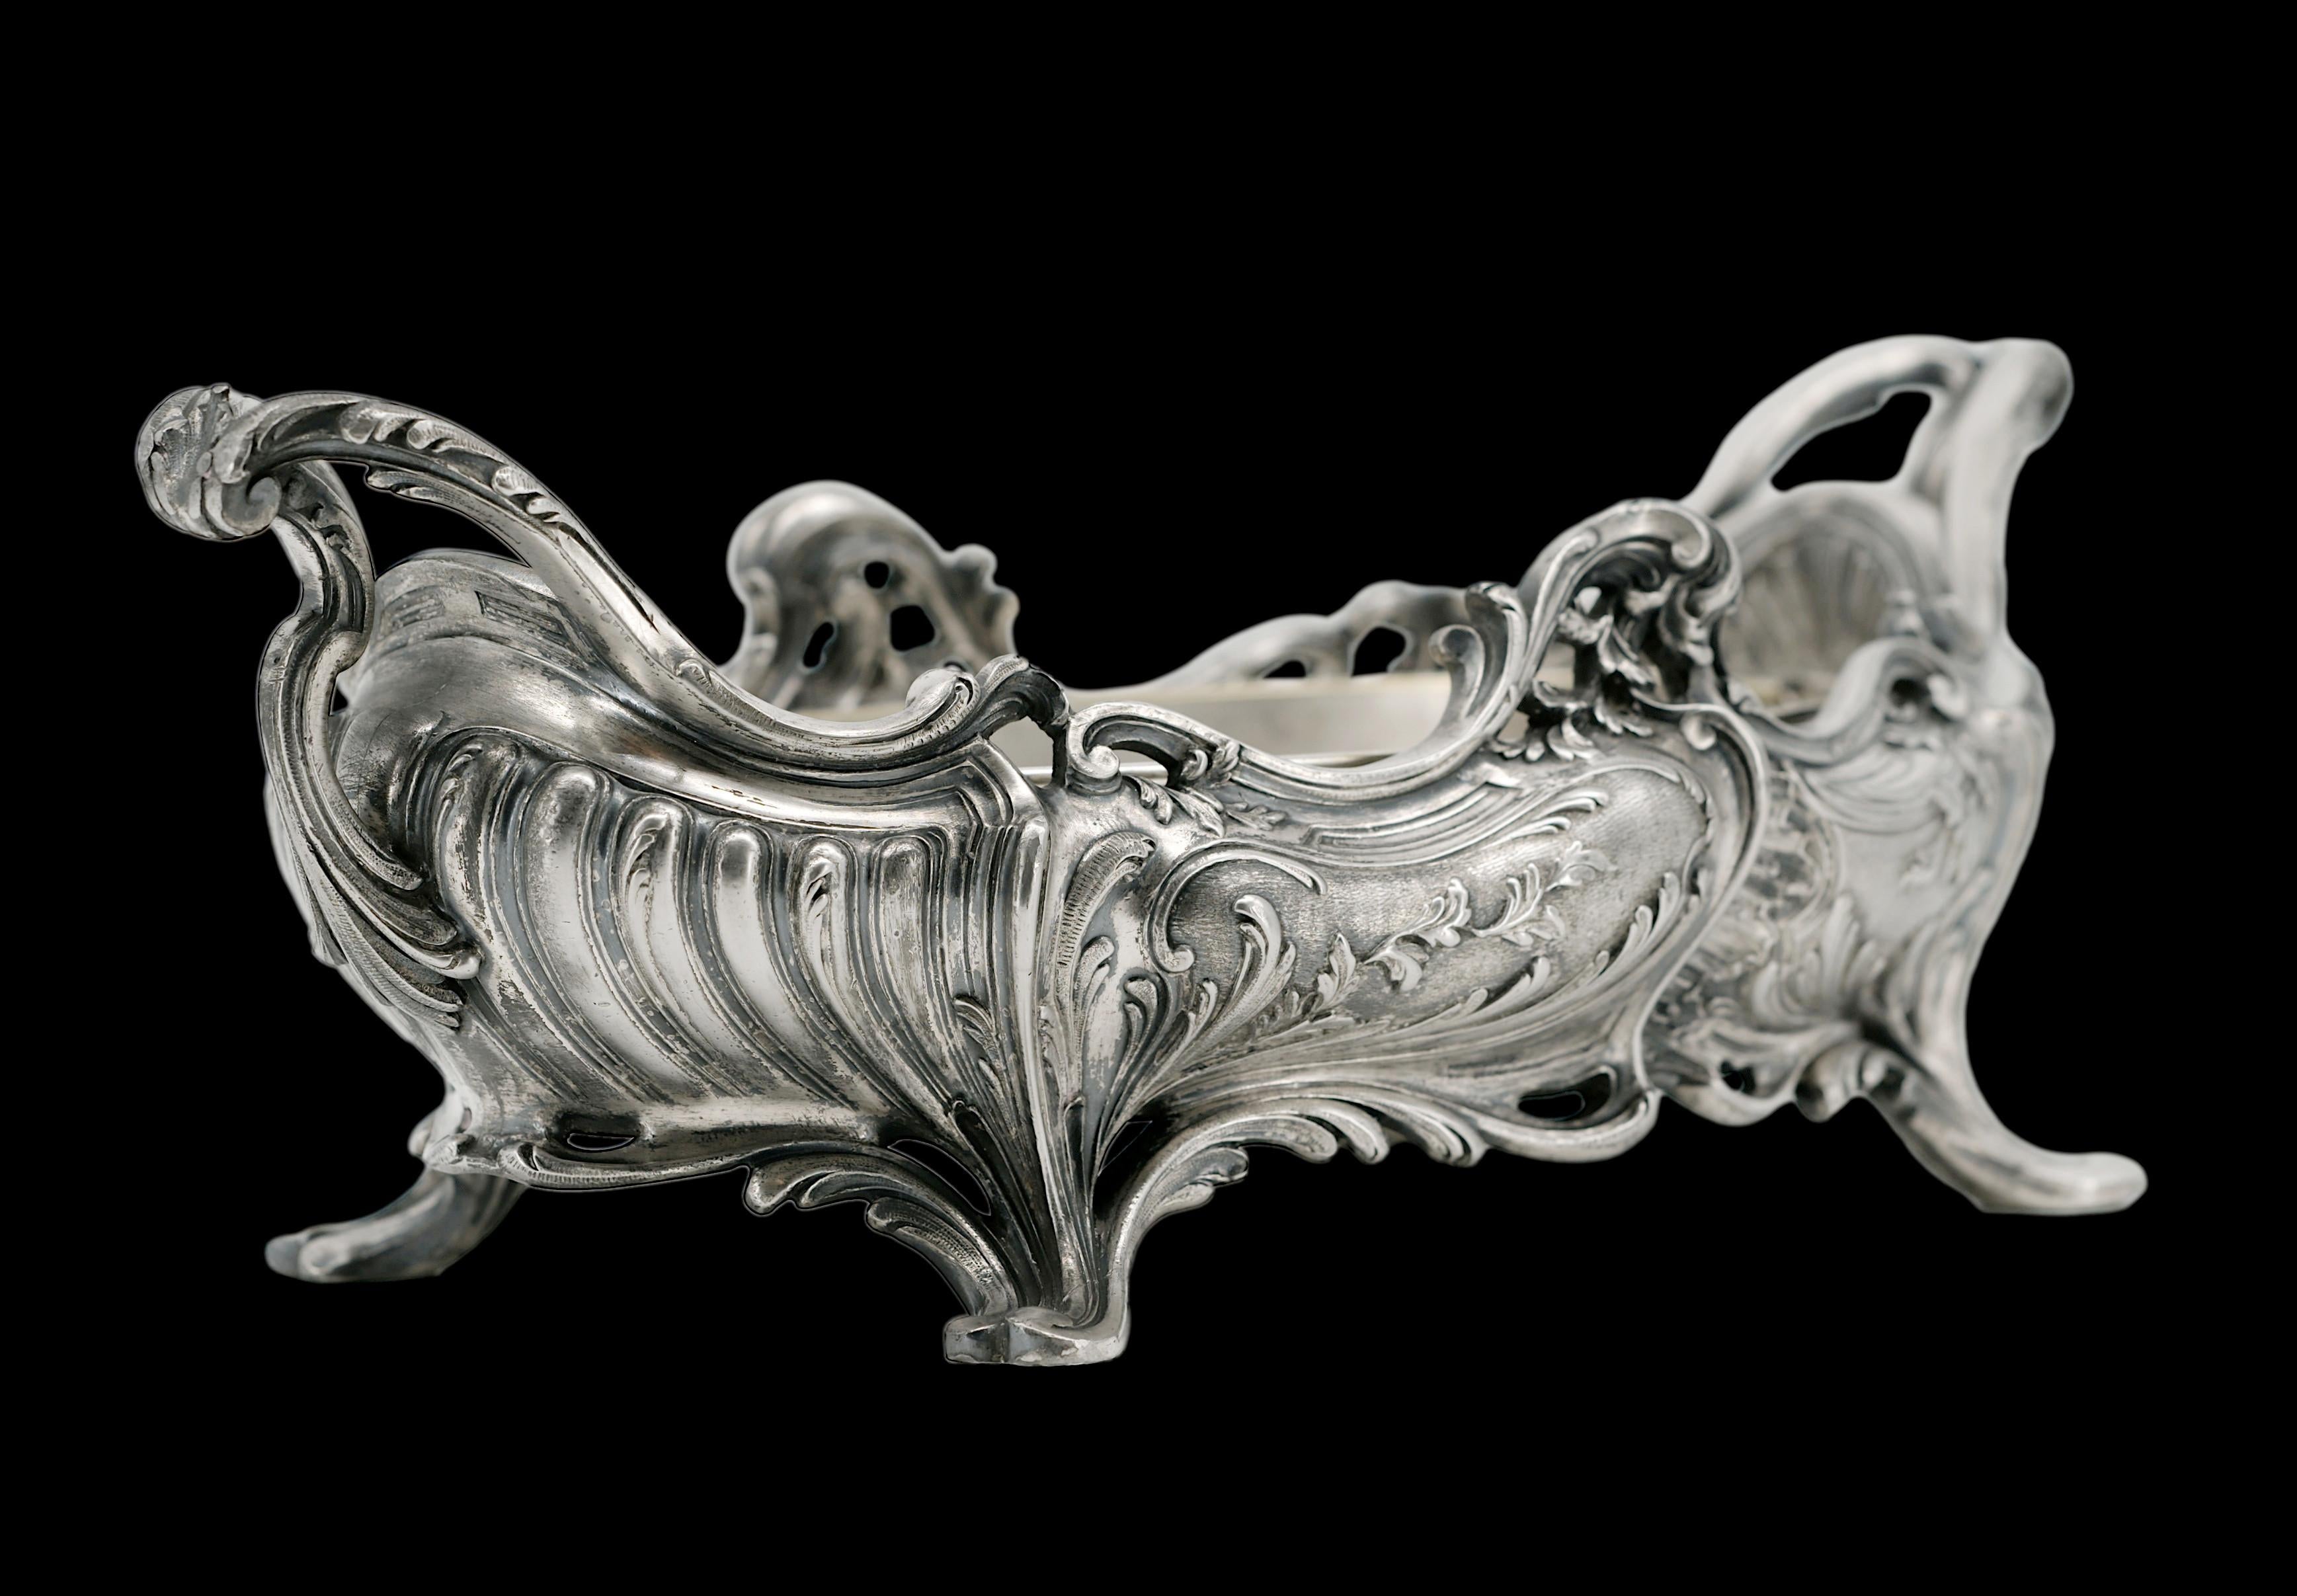 Silvered Victor SAGLIER French Art Nouveau Silverplate Planter Centerpiece, 1890 For Sale